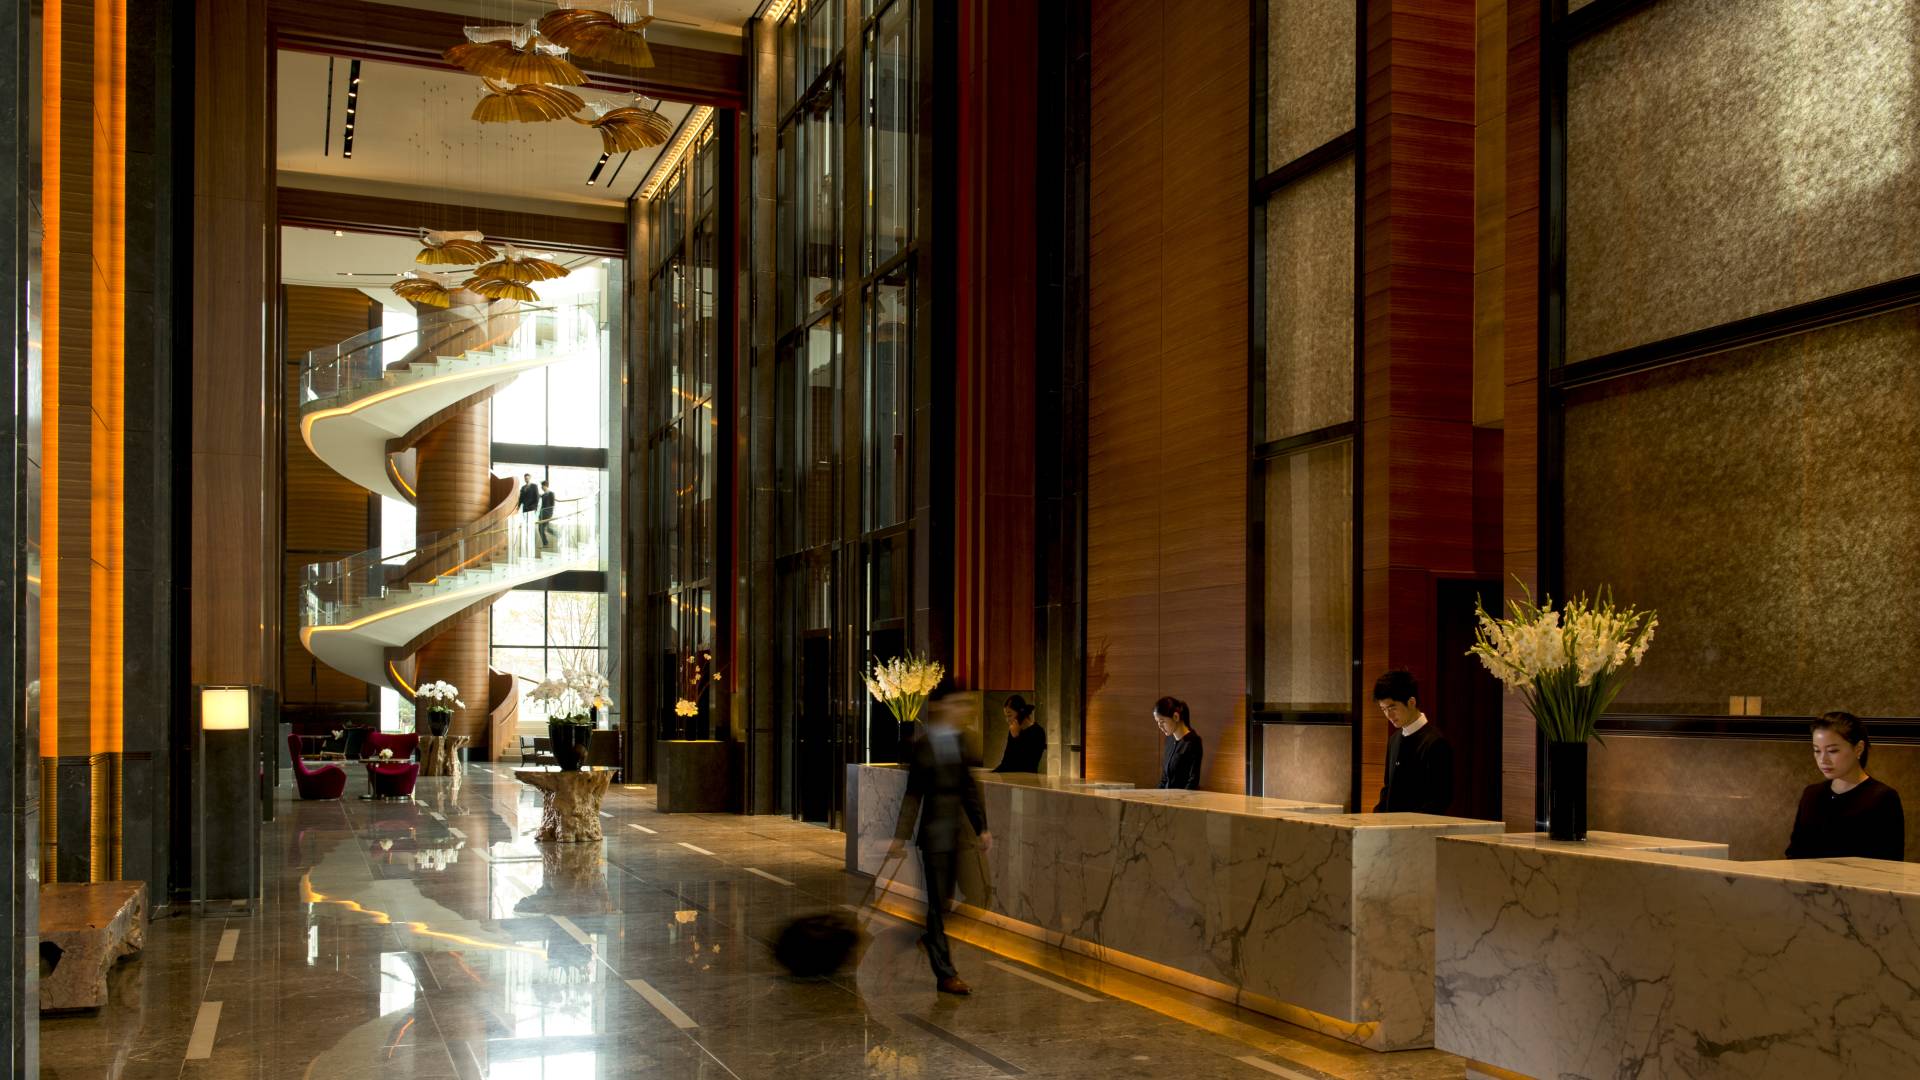 Spacious lobby area at Conrad Seoul, featuring high ceilings and marble floors. A spiral staircase is in the background.